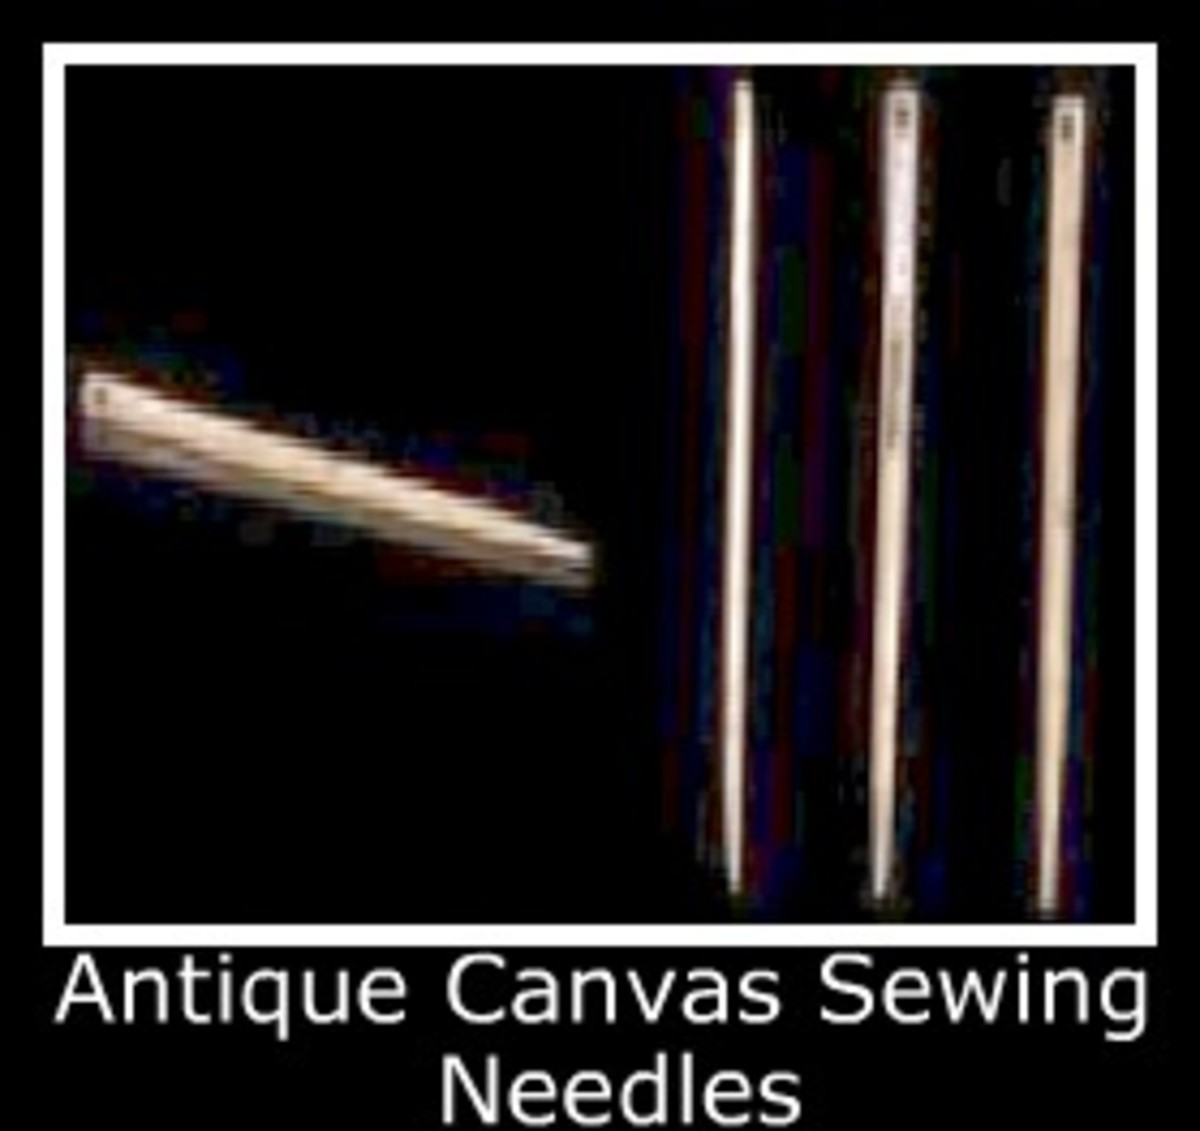 hand-sewing-needles-an-illustrated-guide-to-the-types-and-uses-of-hand-sewing-needles